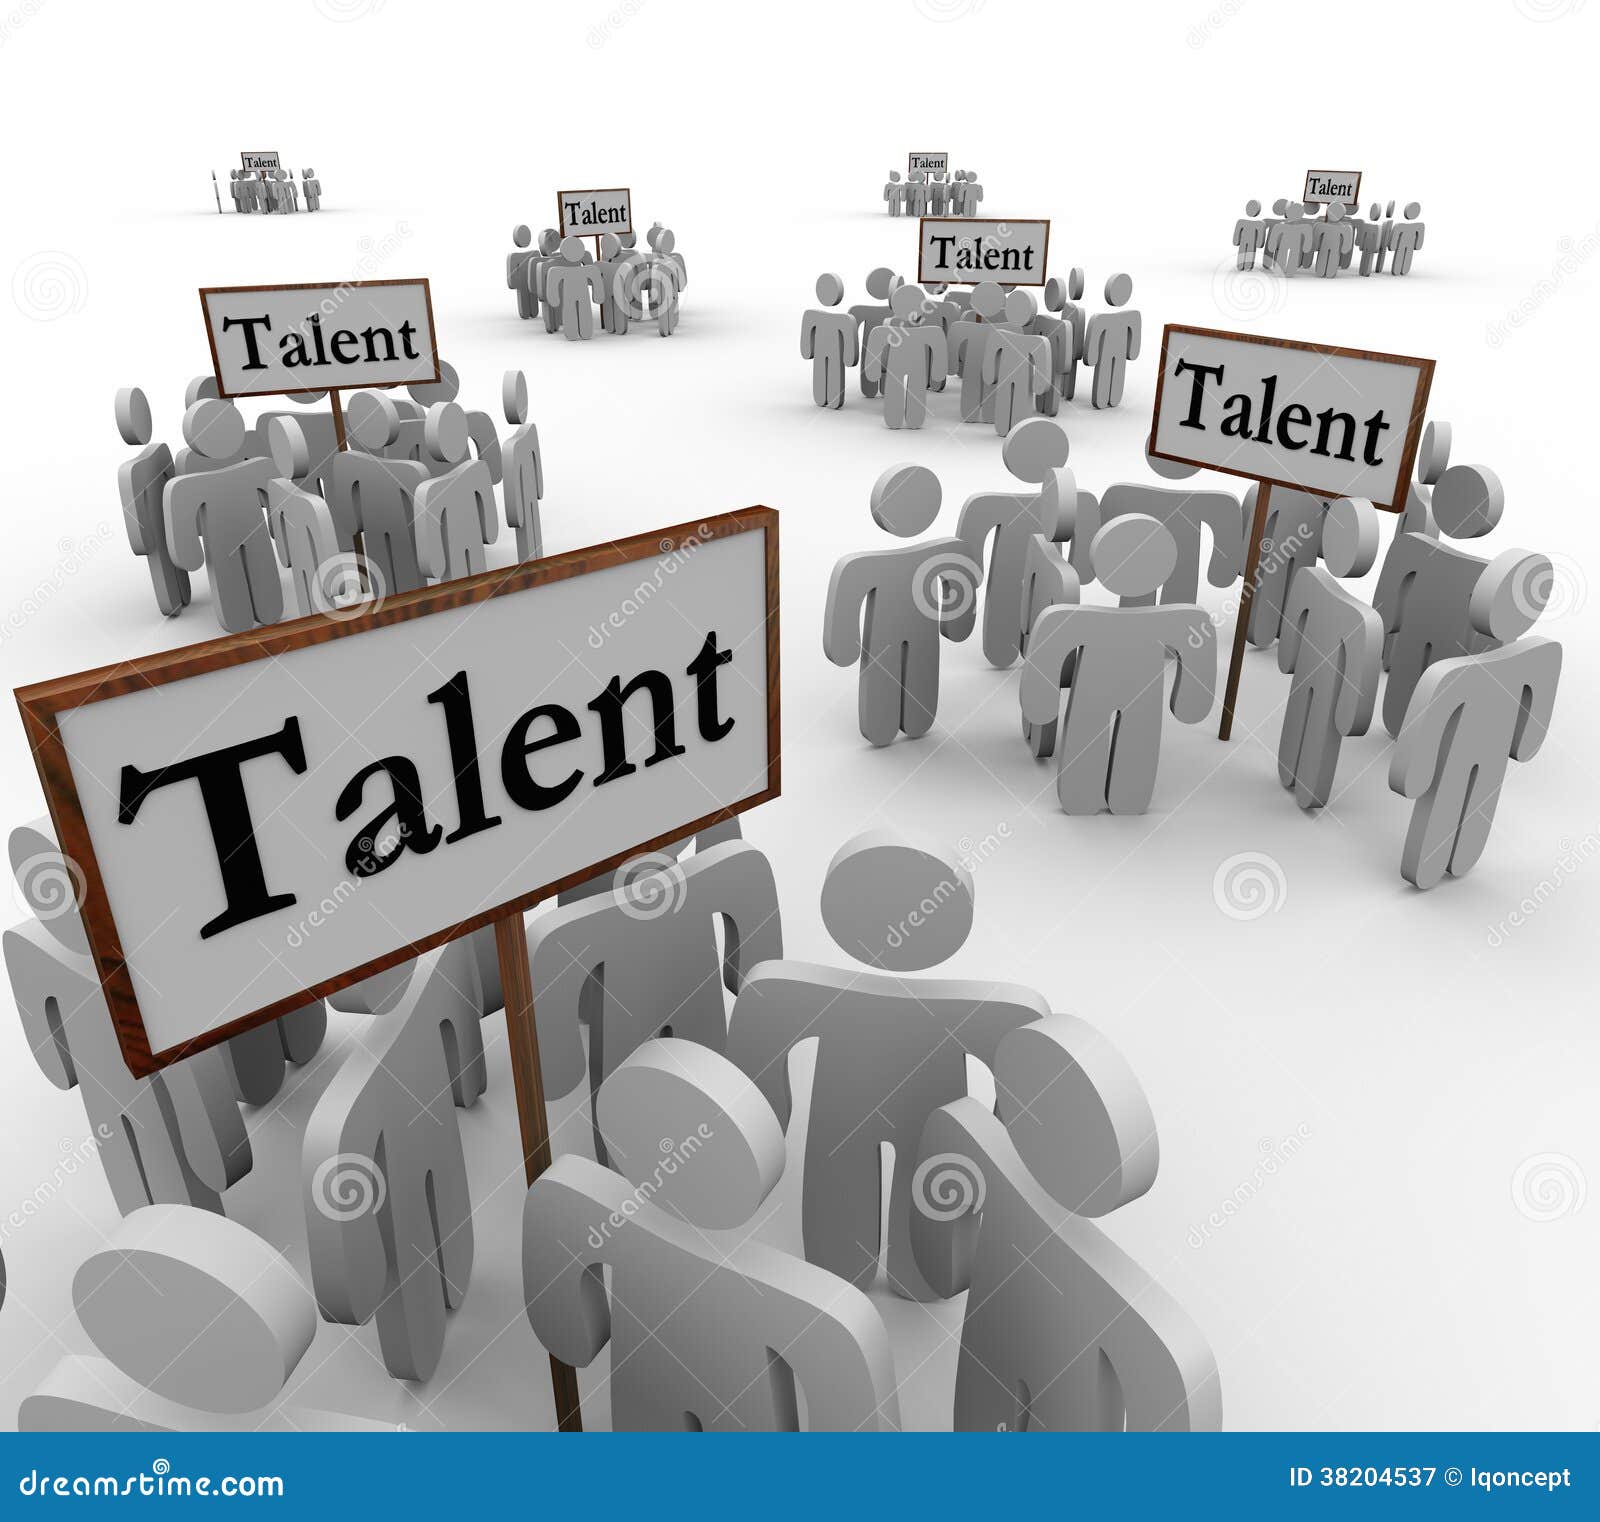 talent groups people job prospects candidates applicants signs